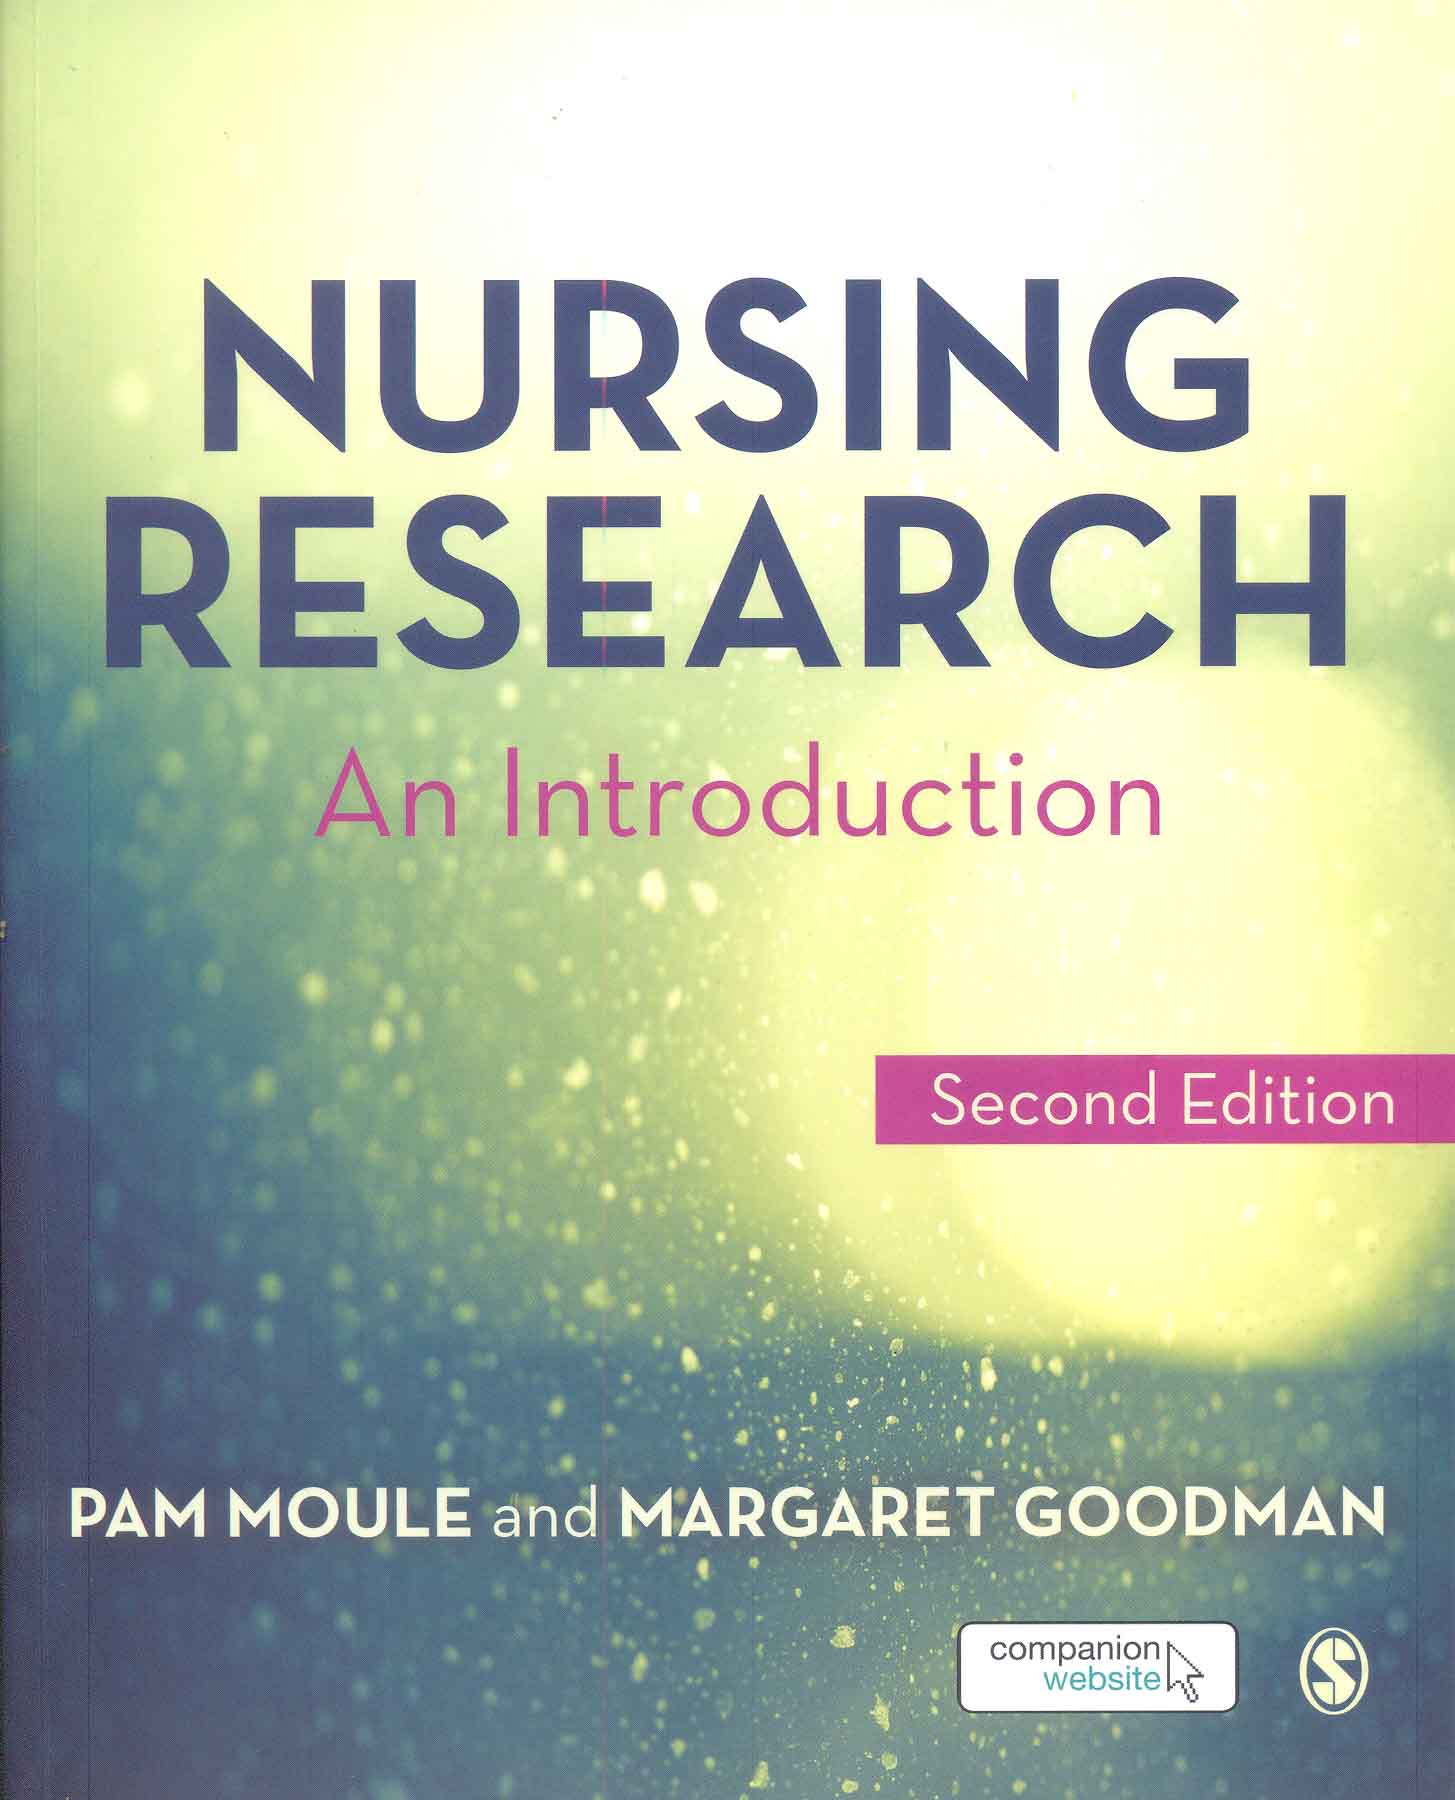 Nursing research : an introduction